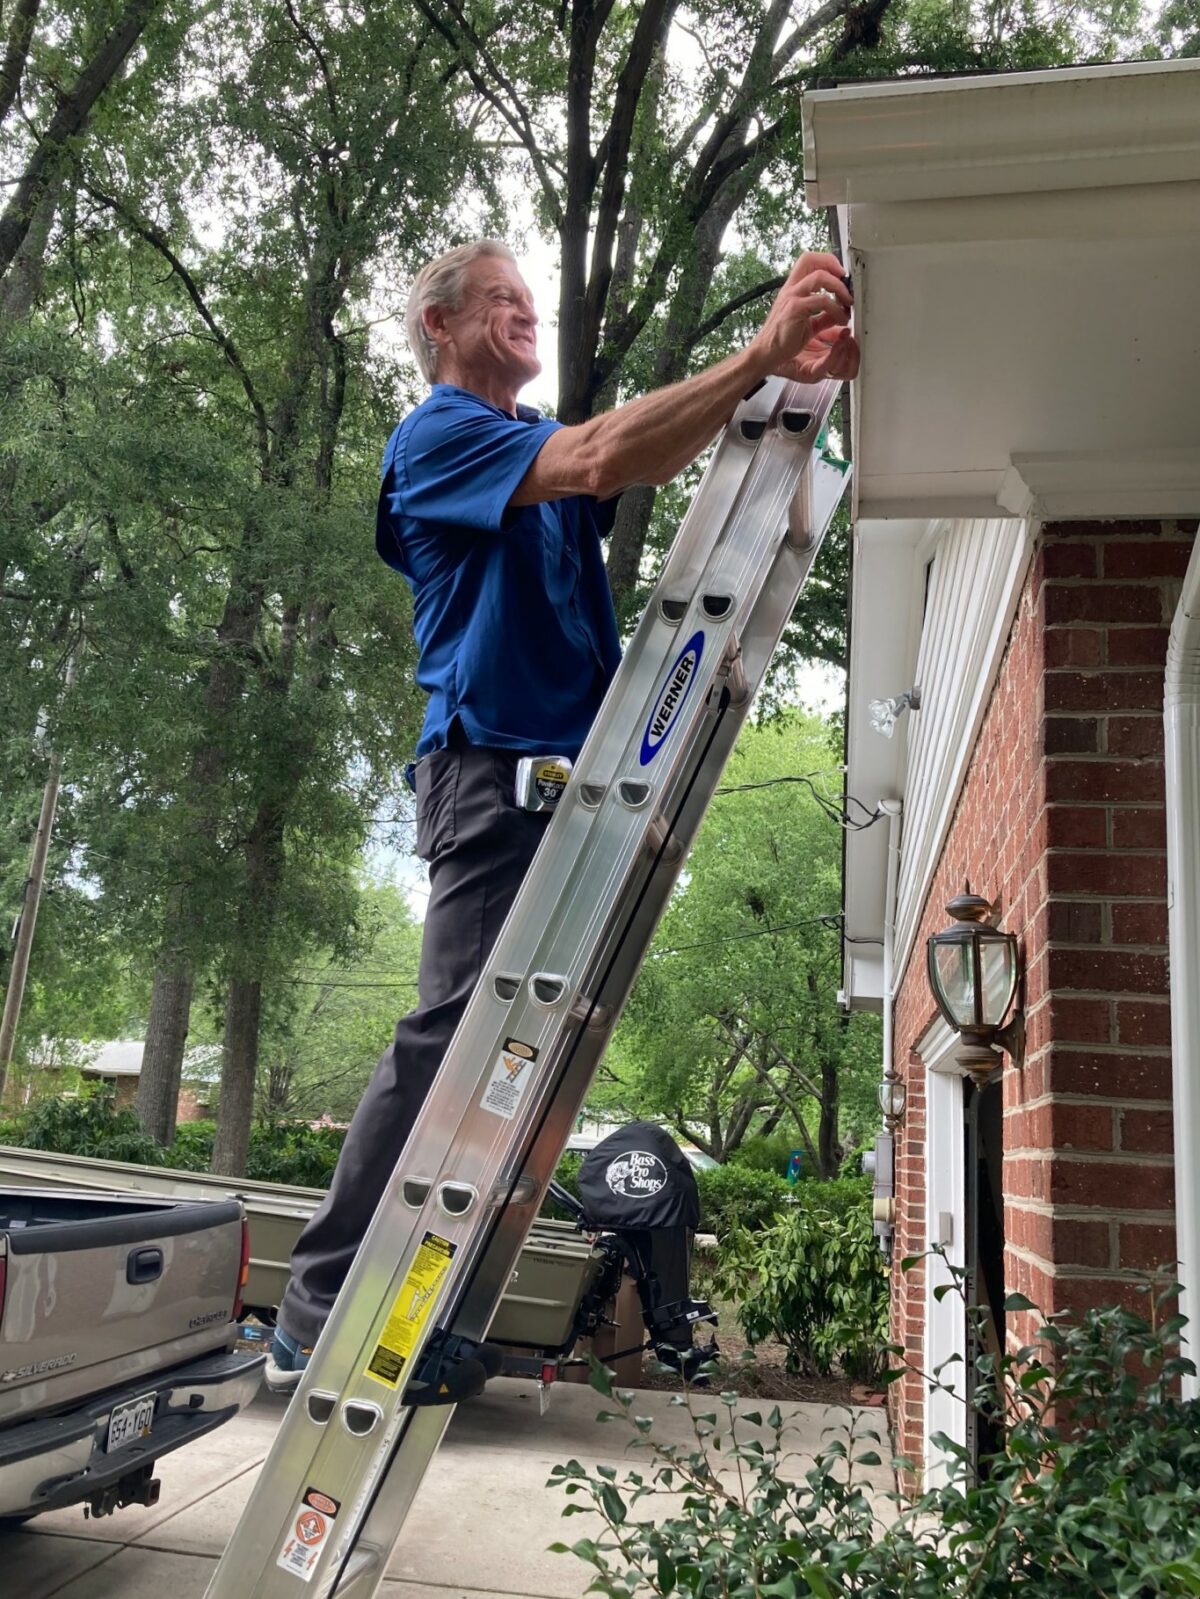 Wood Wise president Hank Wall was recently sighted on a ladder at one of our jobs!